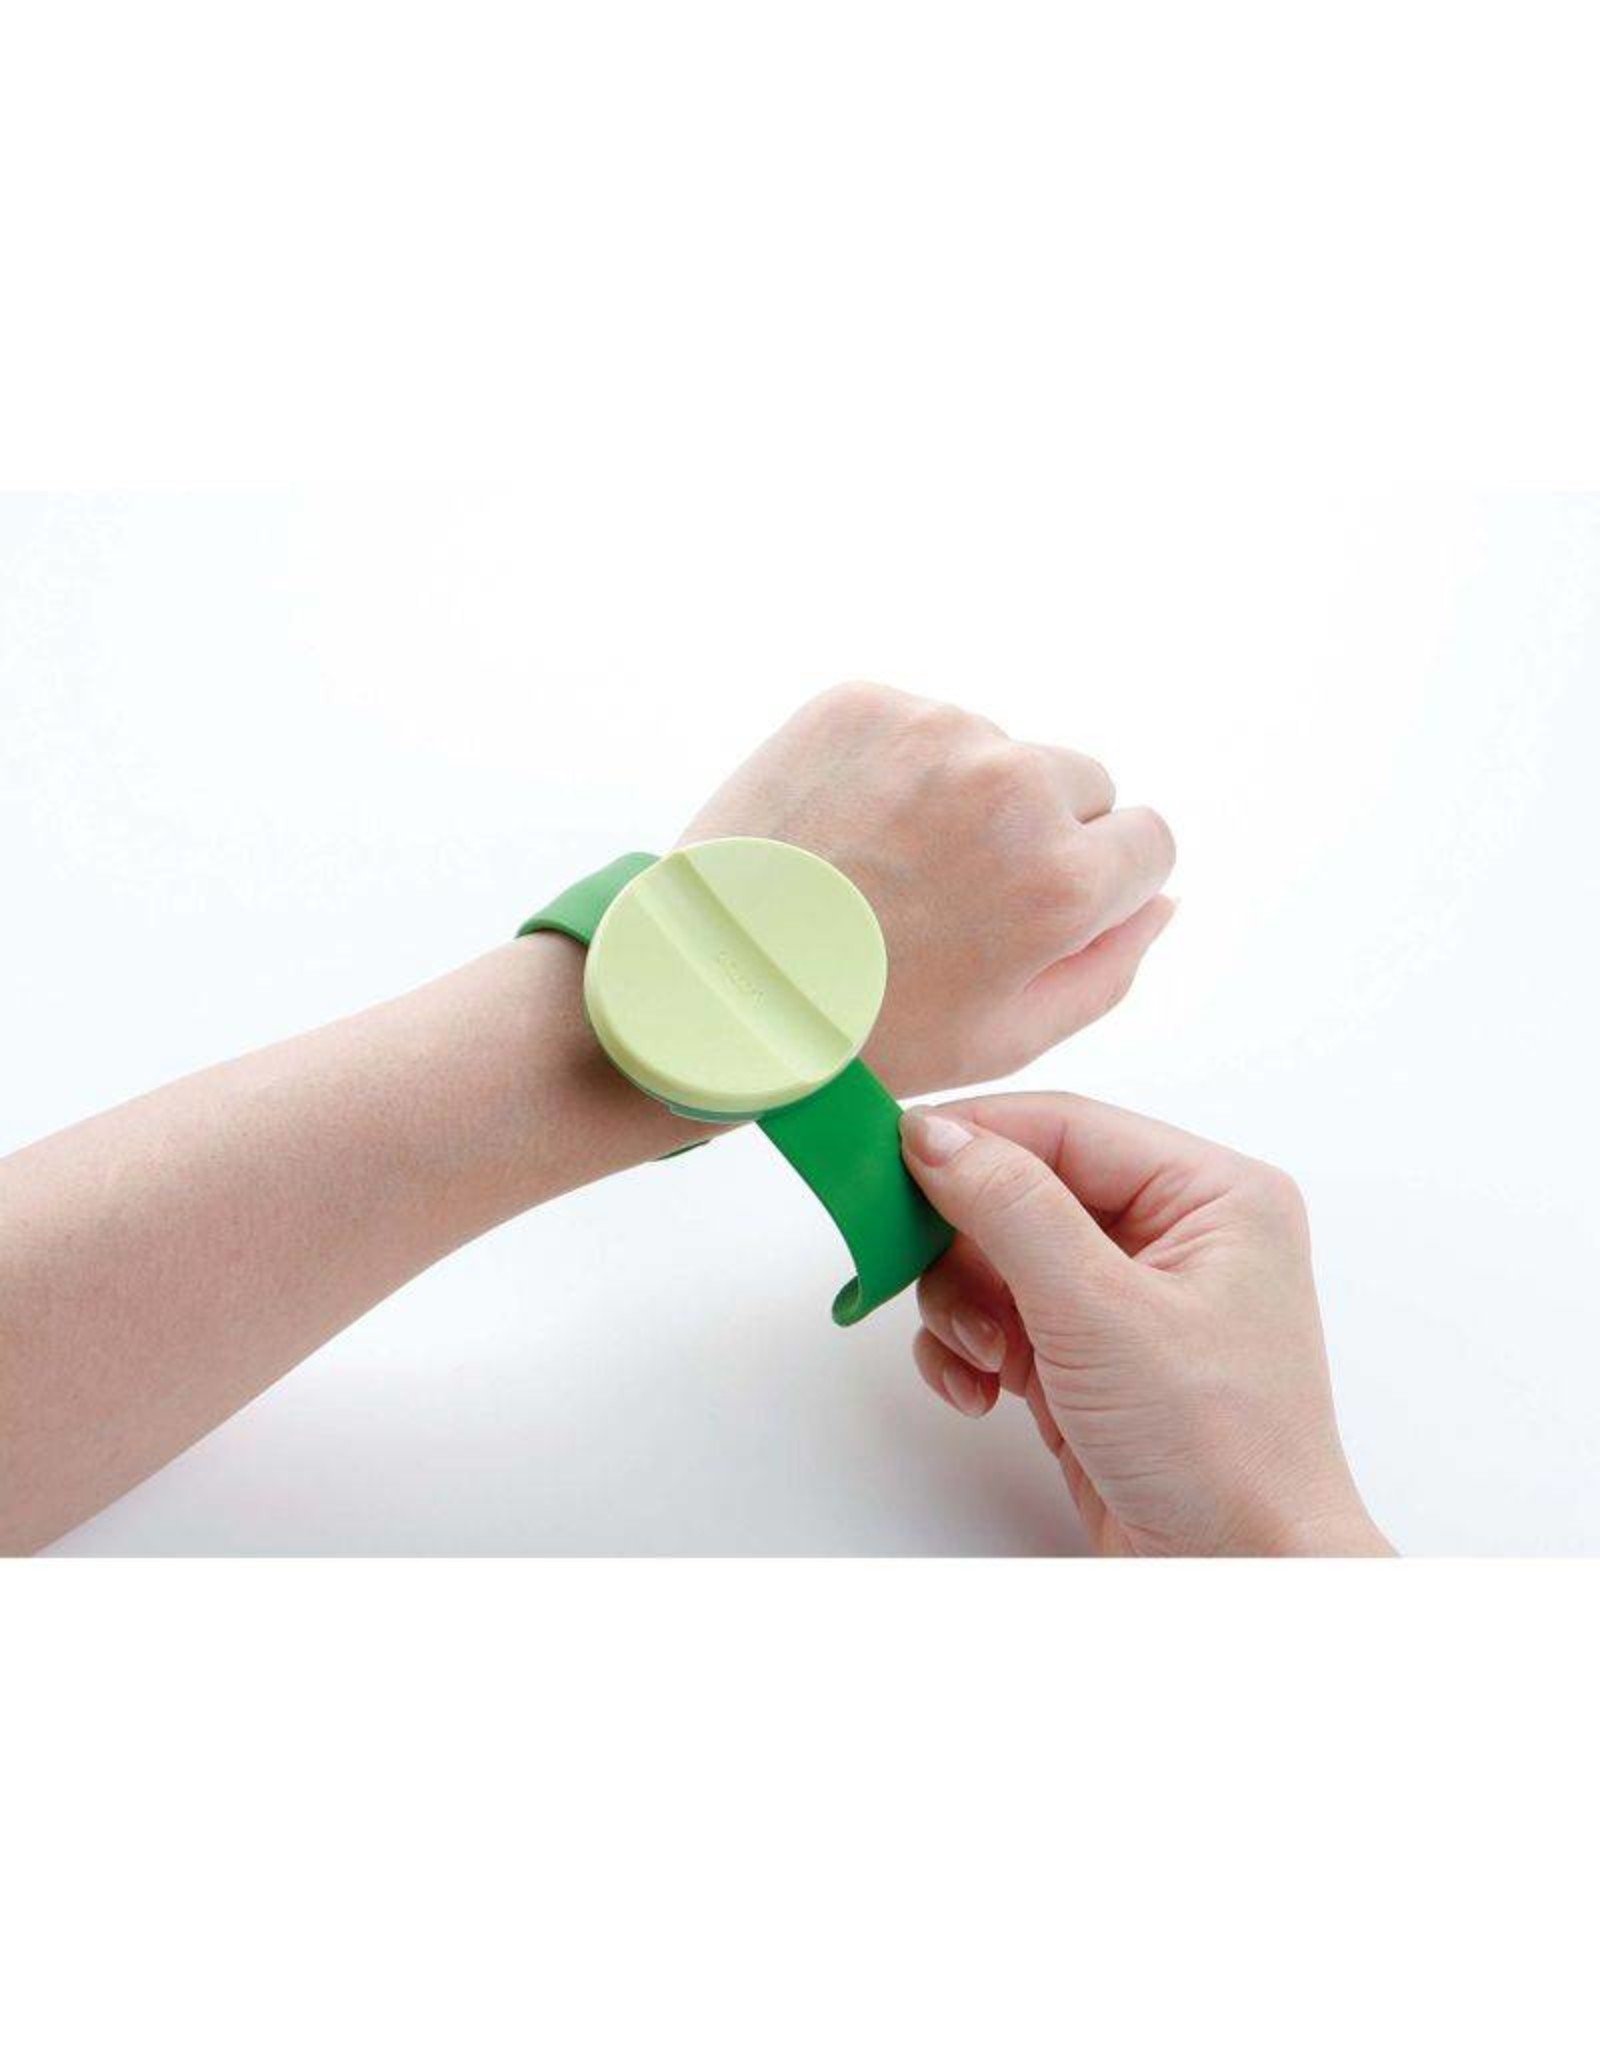 Clover Clover Pin 'n Stow - Magnetic Pincushion Bracelet